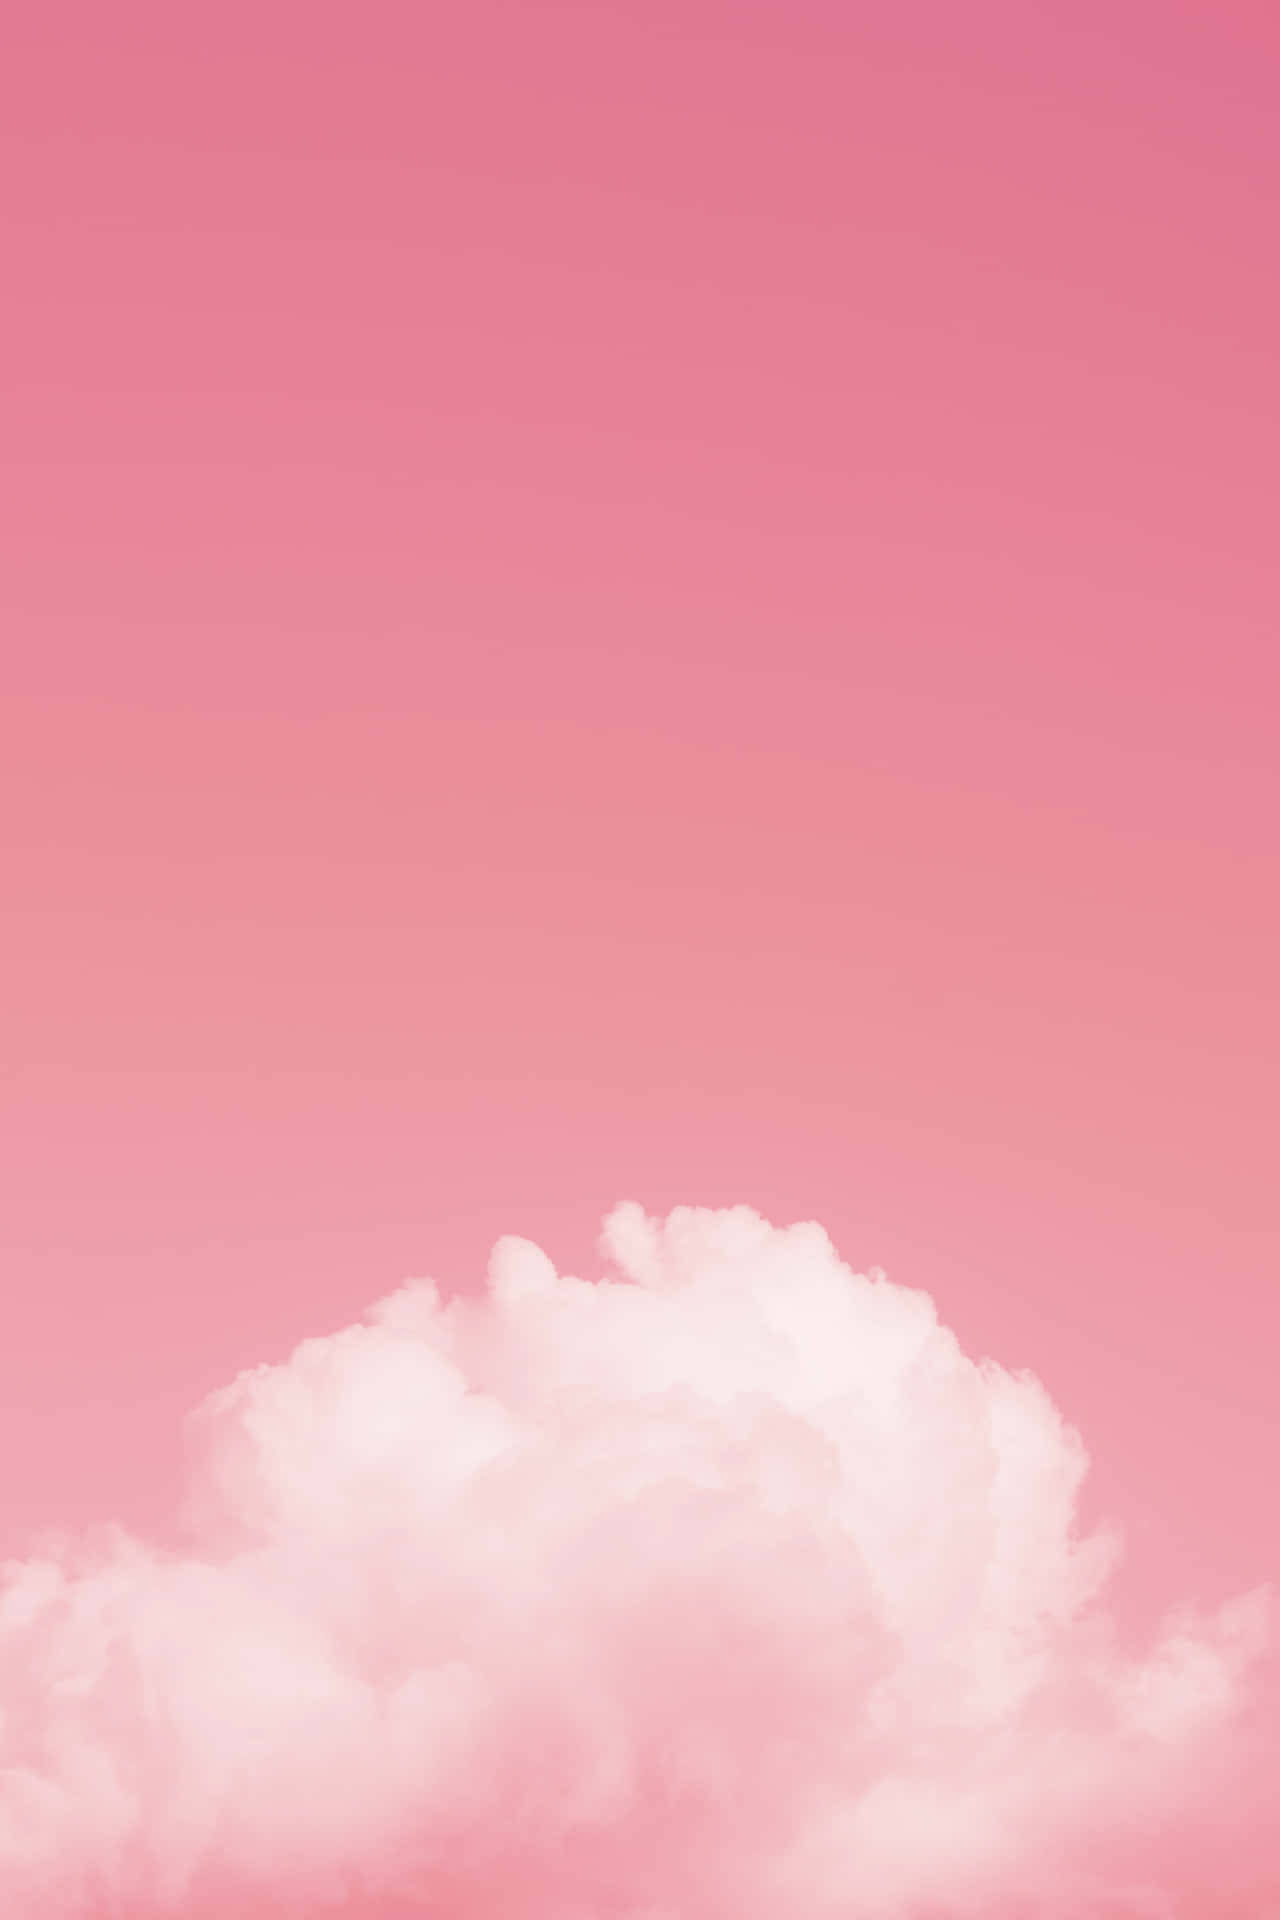 Soft and dreamy pink sky